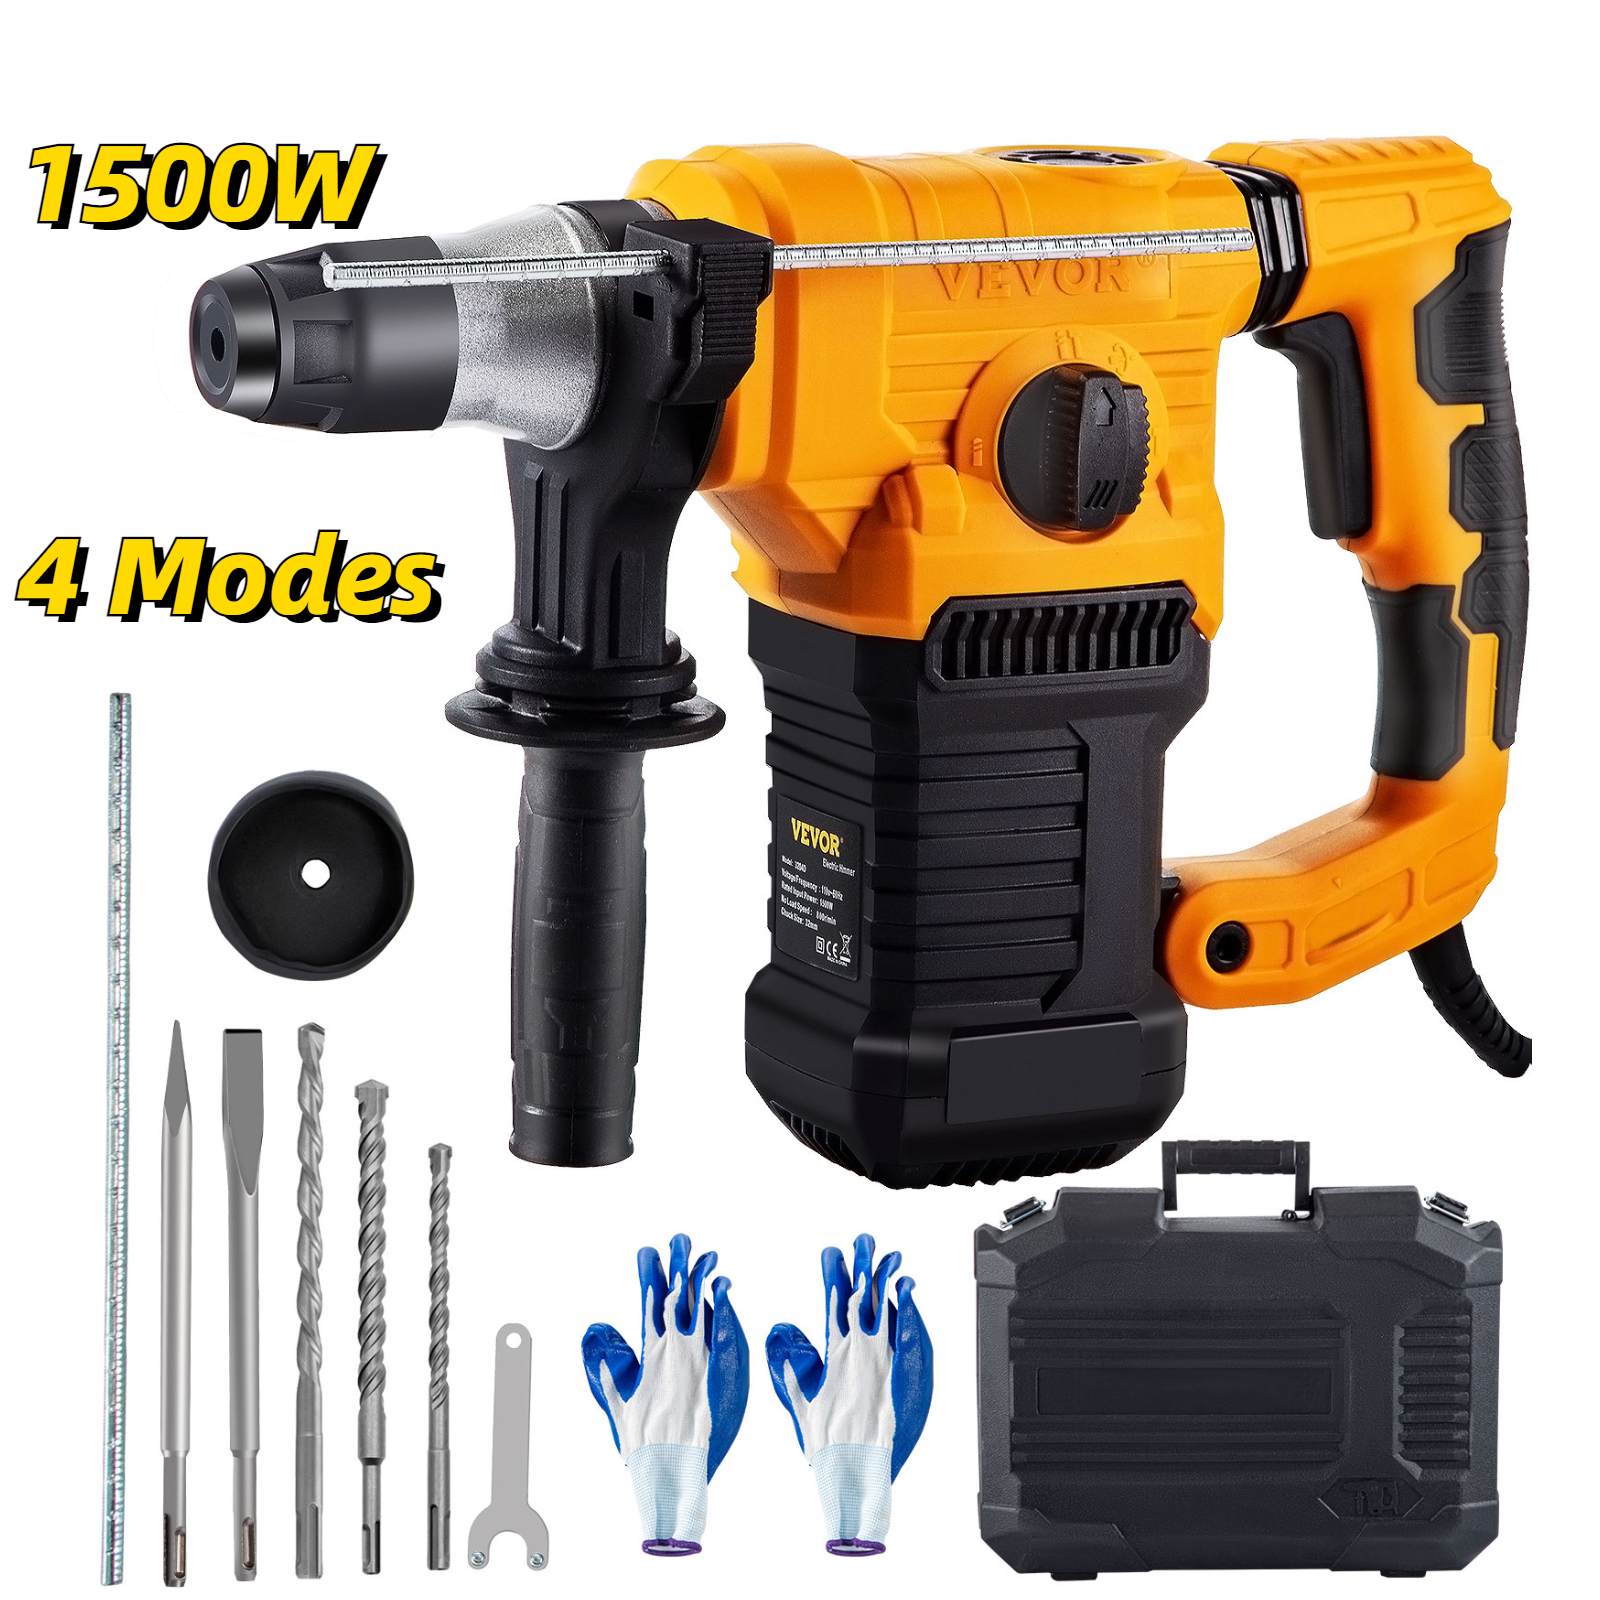 (Out of Stock) 13 AMP Electric Rotary Hammer SDS Plus Demolition Jackhammer Breaker 3 in1 Electric Wood Concrete Perforator